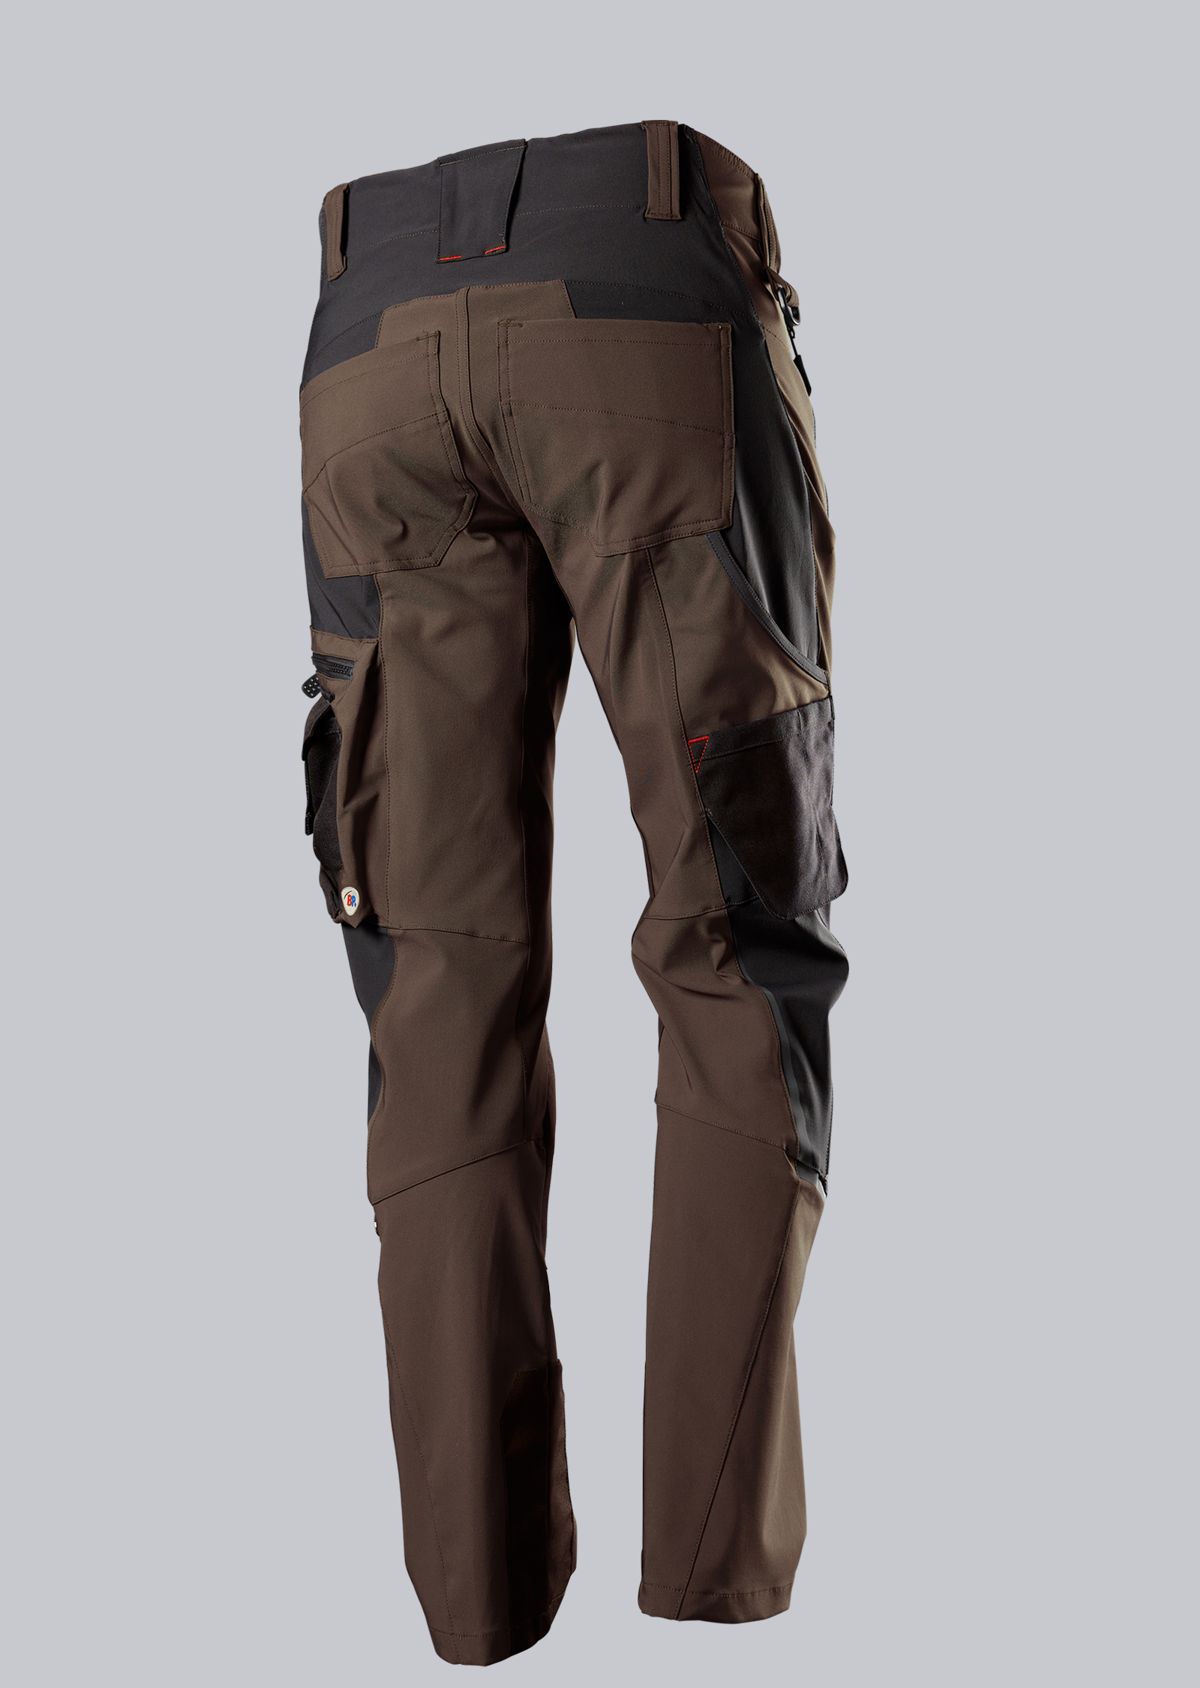 BP® Super-stretch work trousers with knee pad pockets